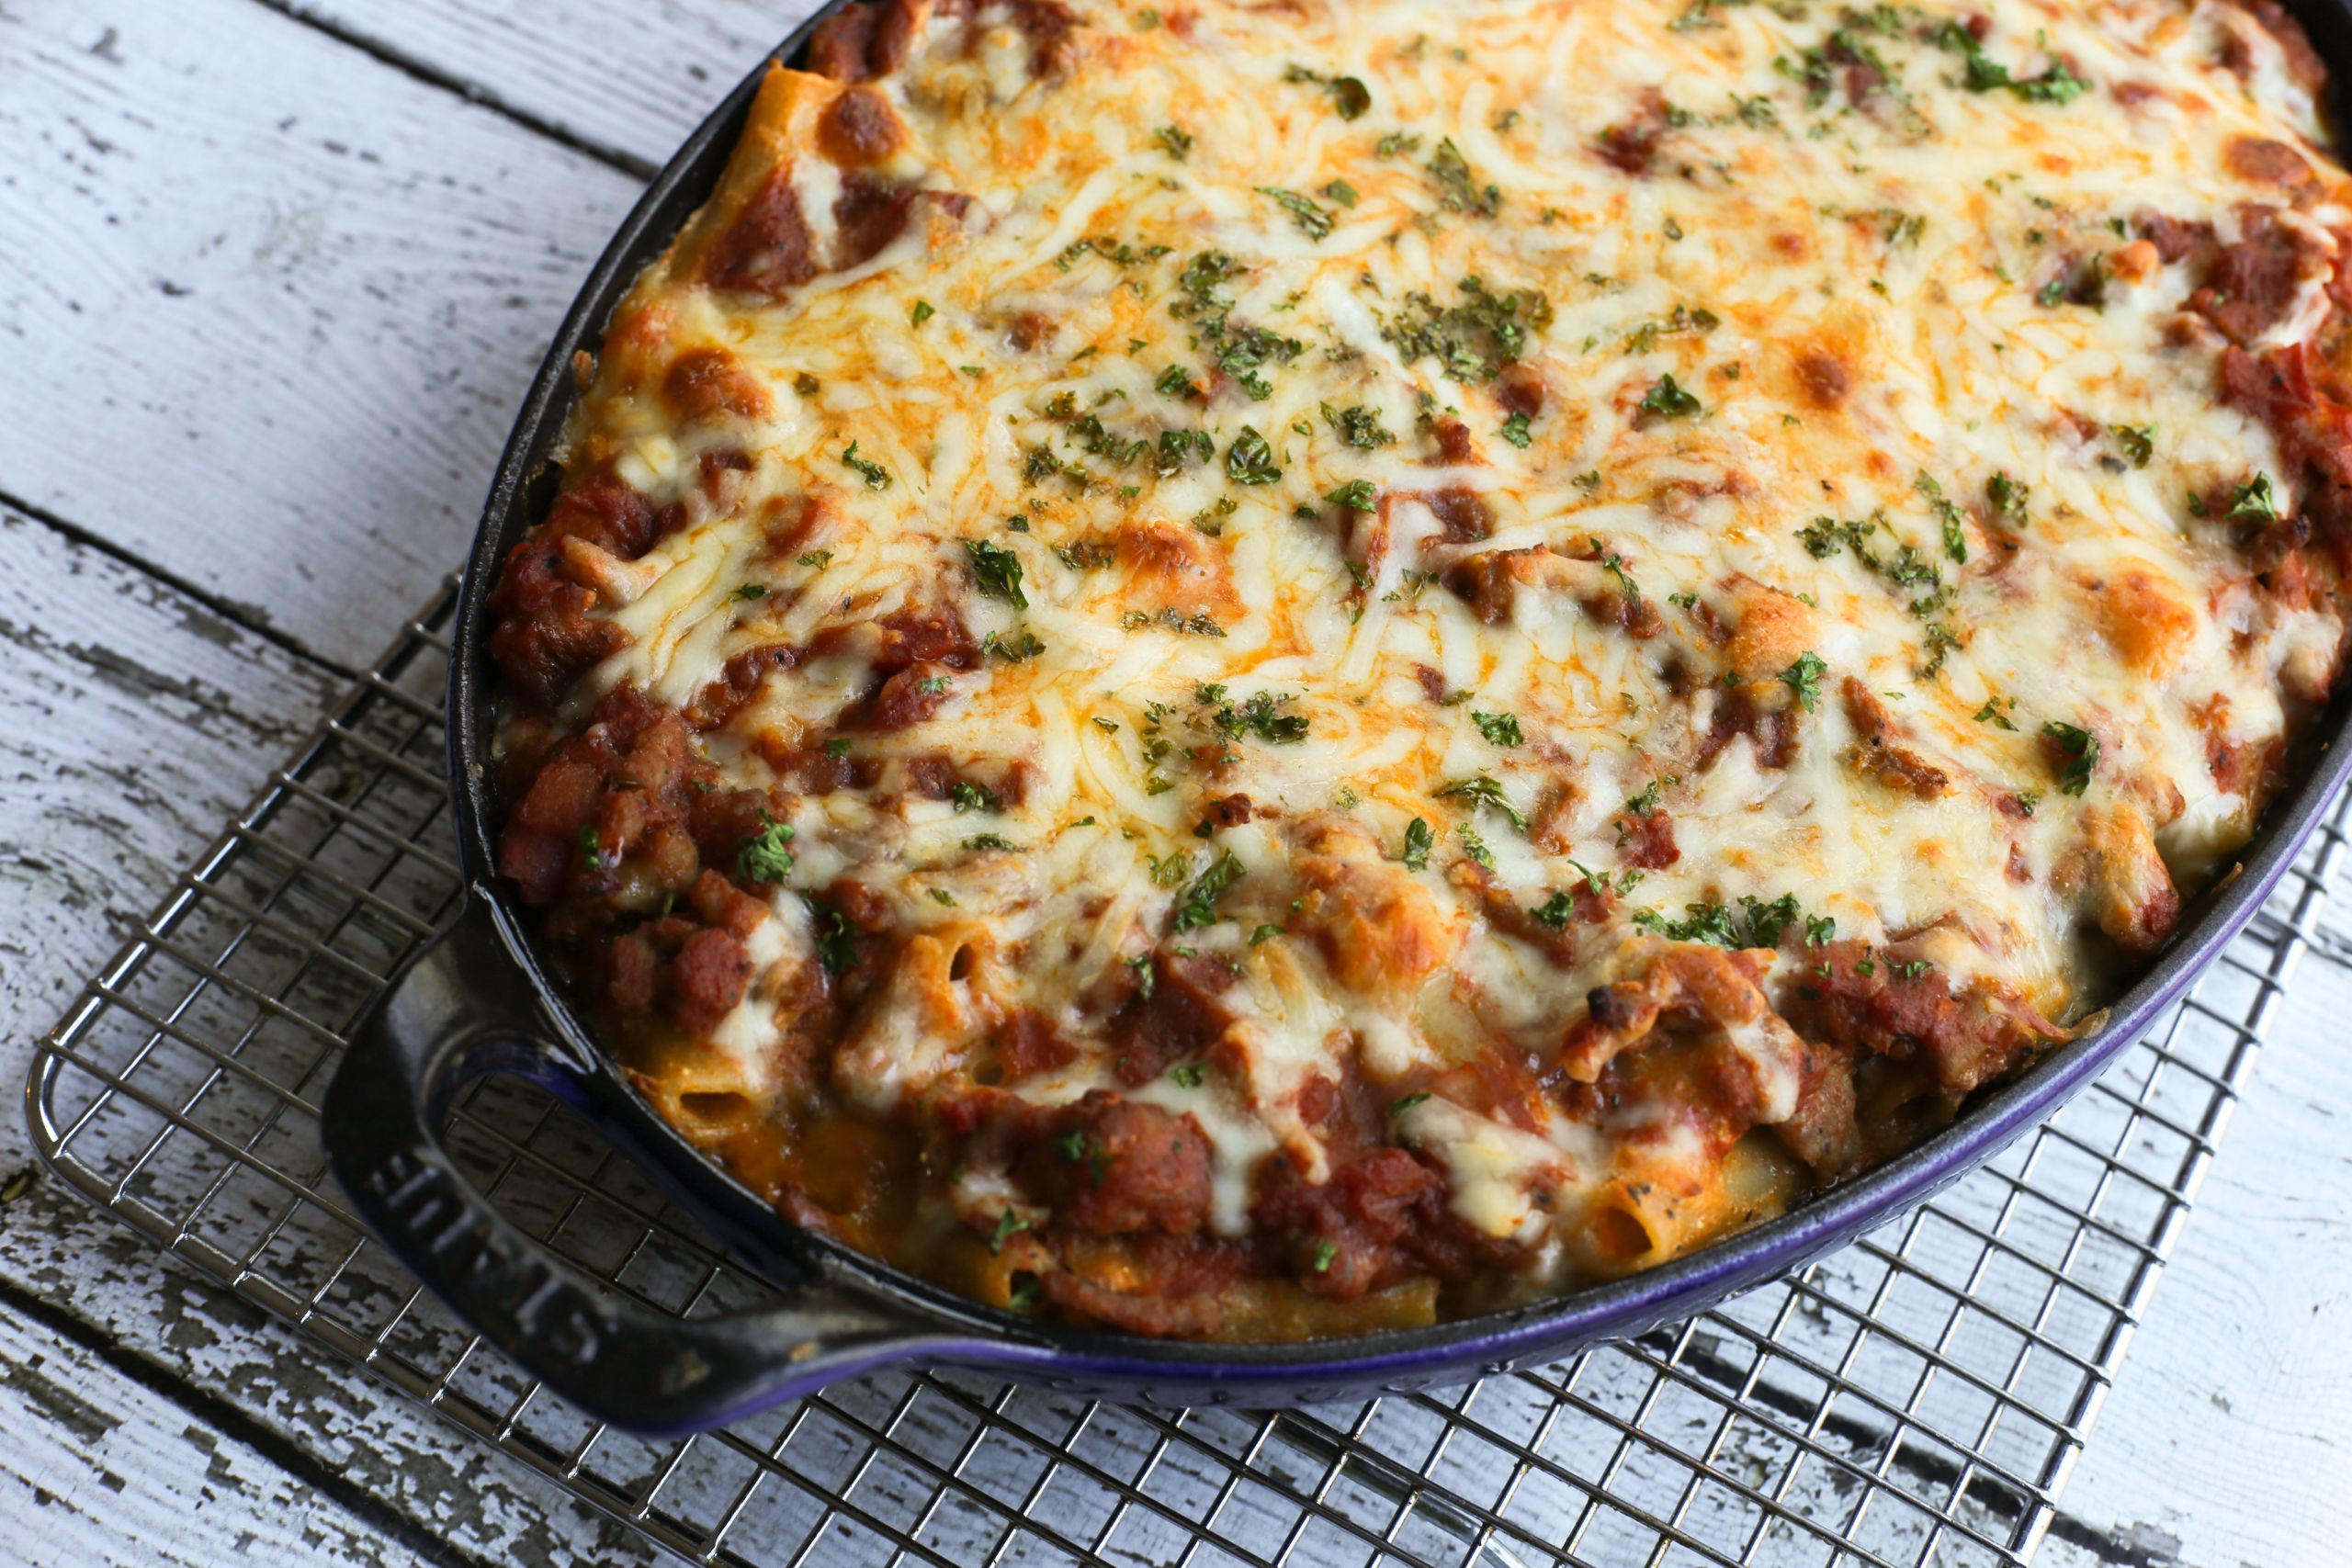 Ground Beef and Italian Sausage Recipes Awesome Meaty Baked Ziti Recipe with Ground Beef and Sausage